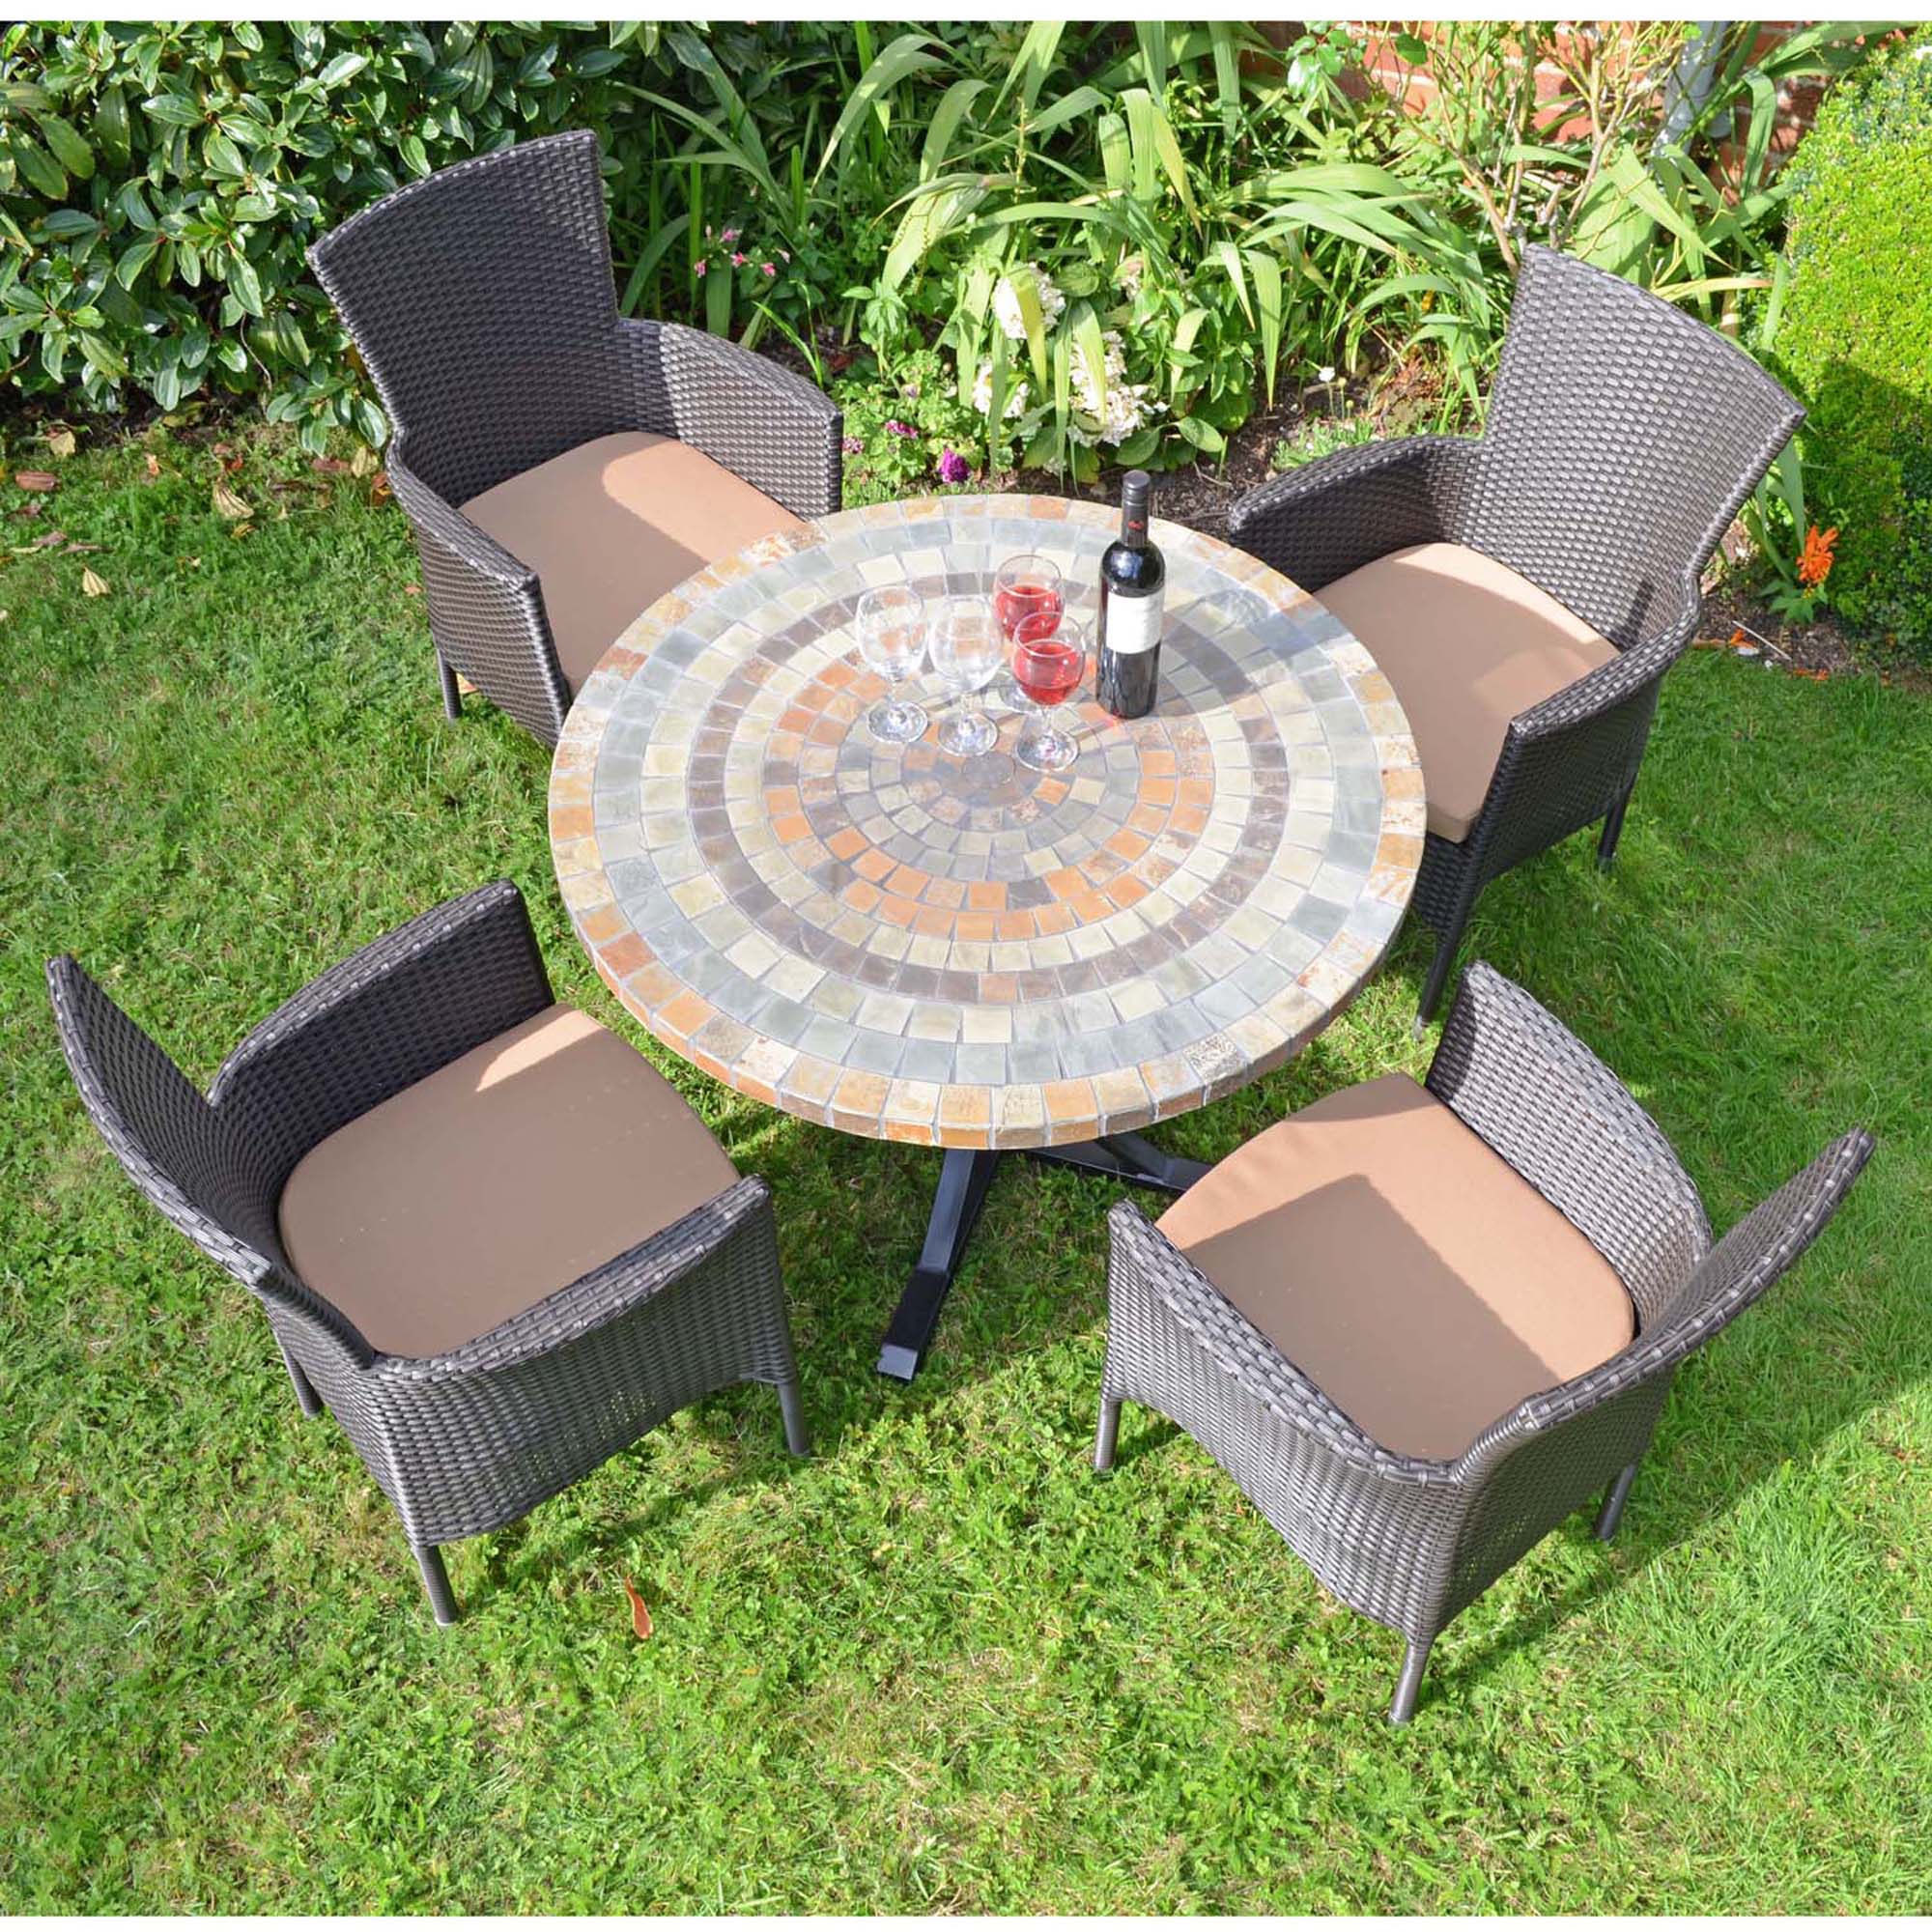 Byron Manor Monterey Stone Mosaic Garden Dining Table with 4 Stockholm Brown Wicker Chairs Dining Sets Byron Manor   